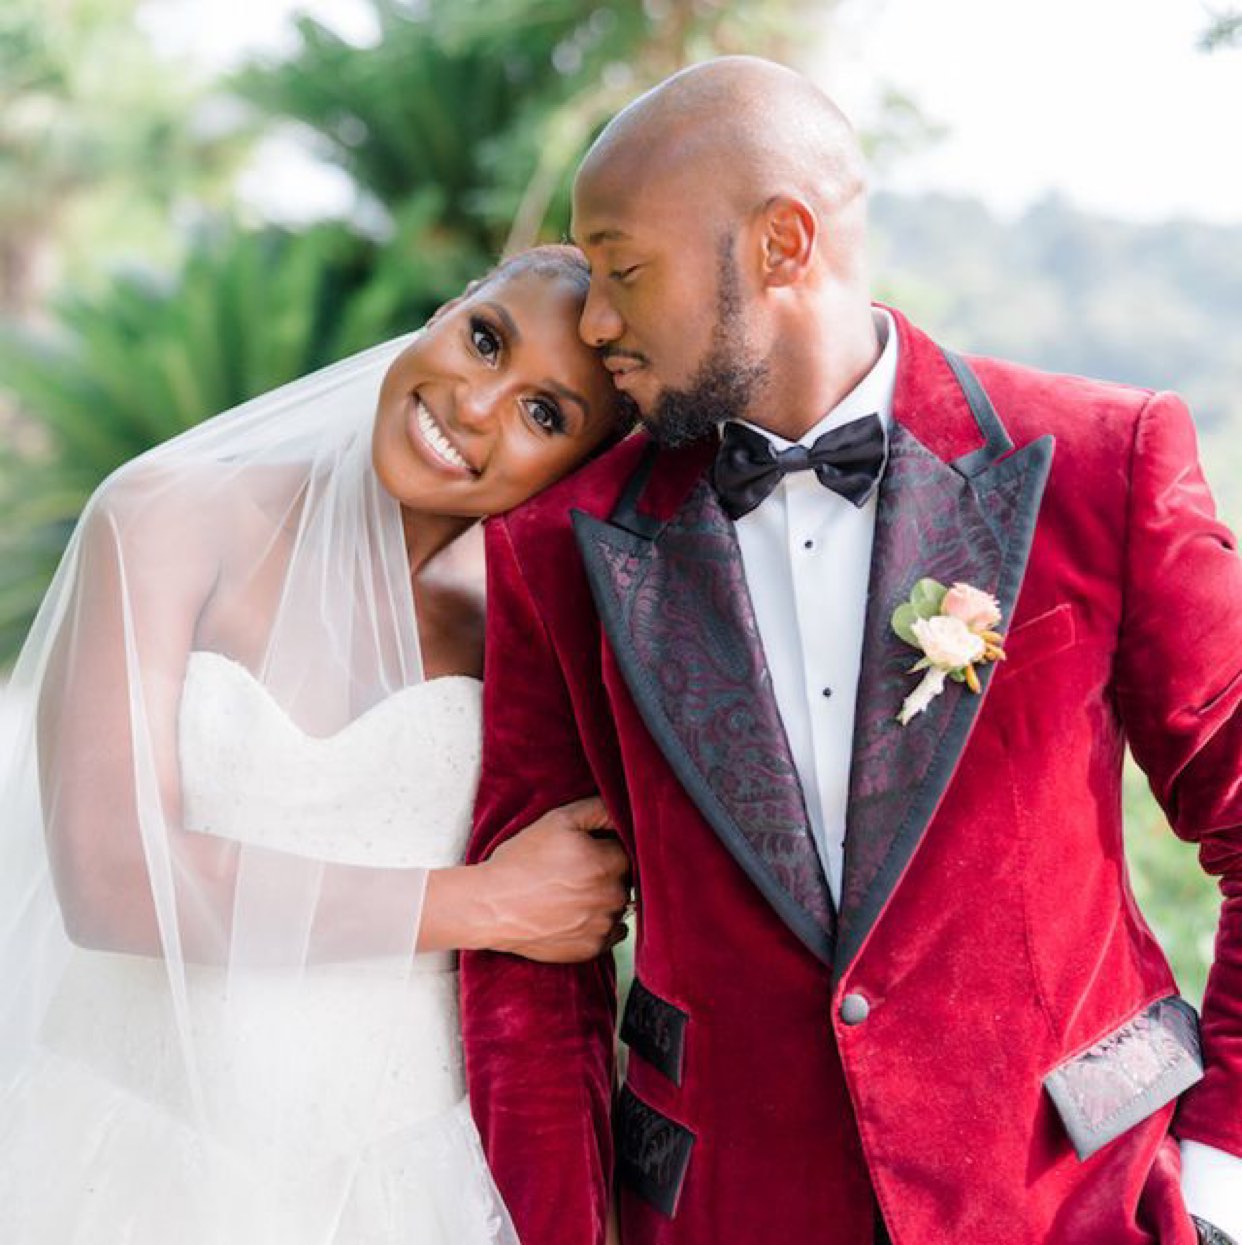 Have You Seen Issa Rae Is Now Officially Married To Her Longtime Boyfriend? 